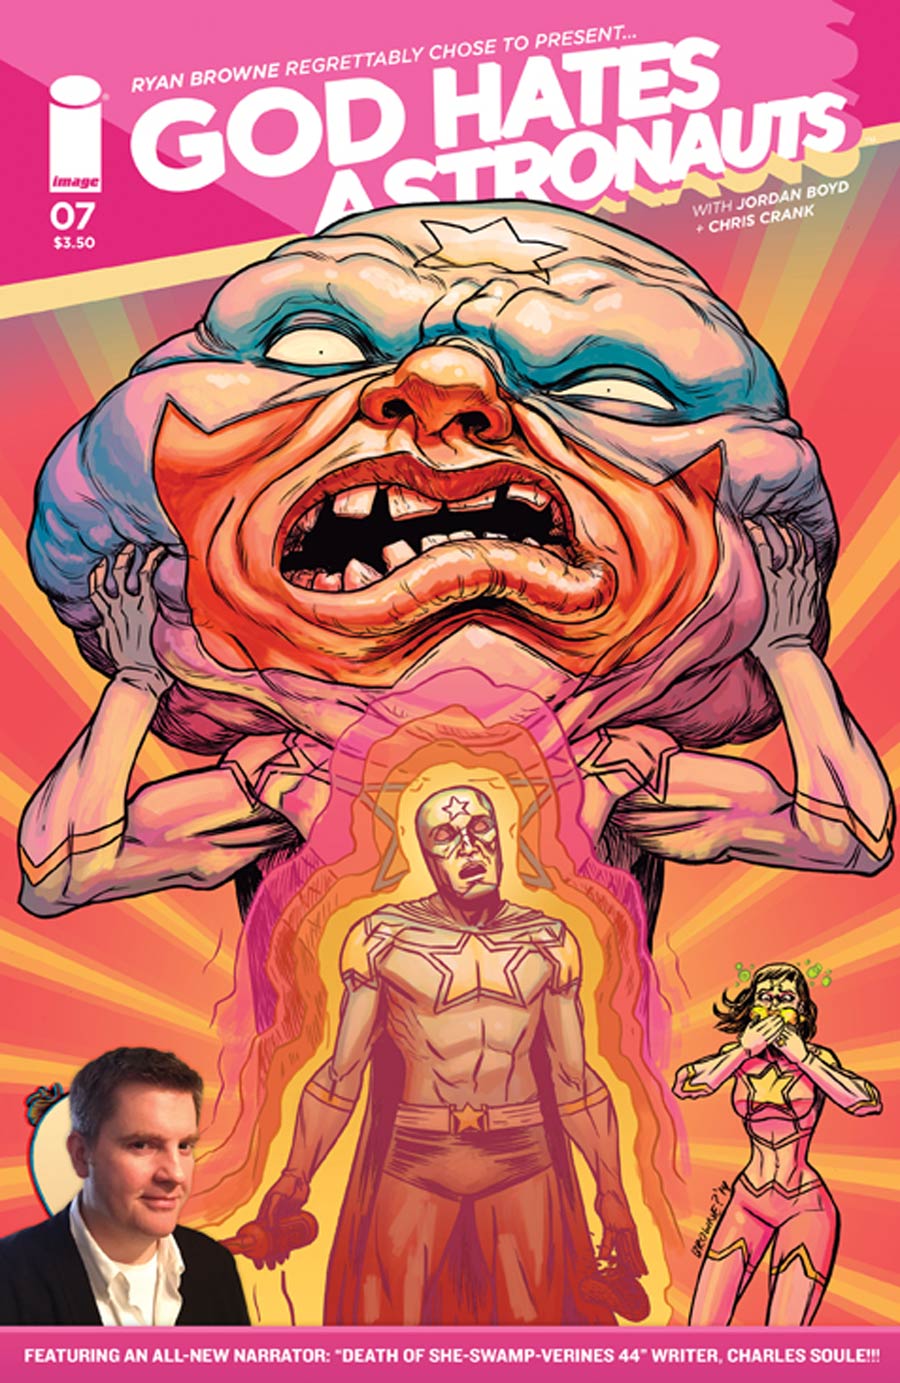 God Hates Astronauts #7 Cover A Ryan Browne